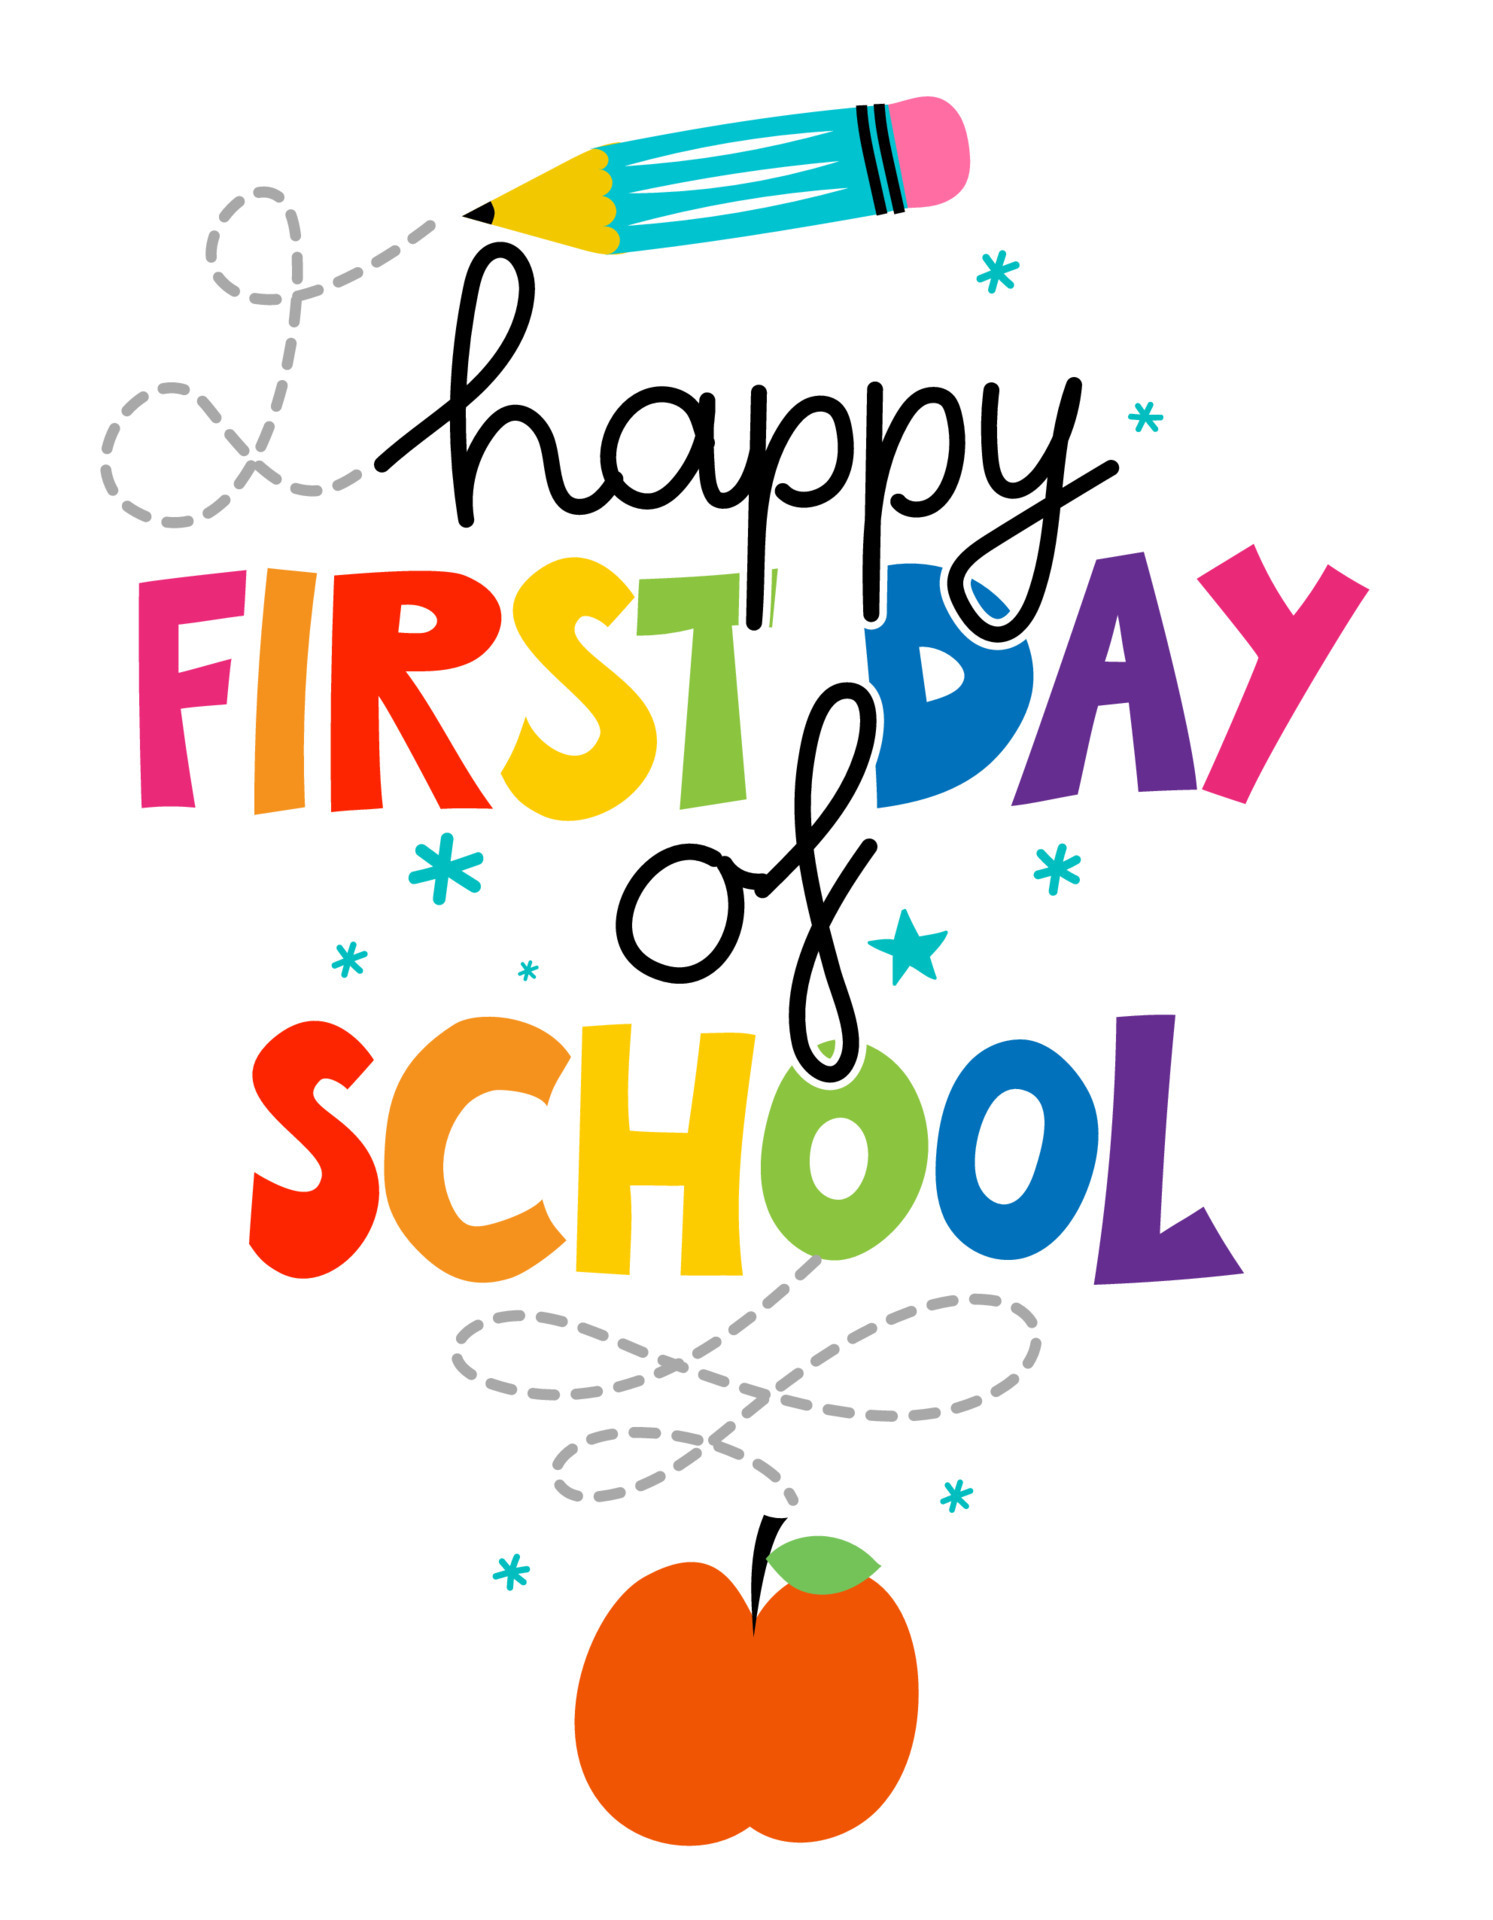 Happy first day of School typography design. Good for clothes, gift